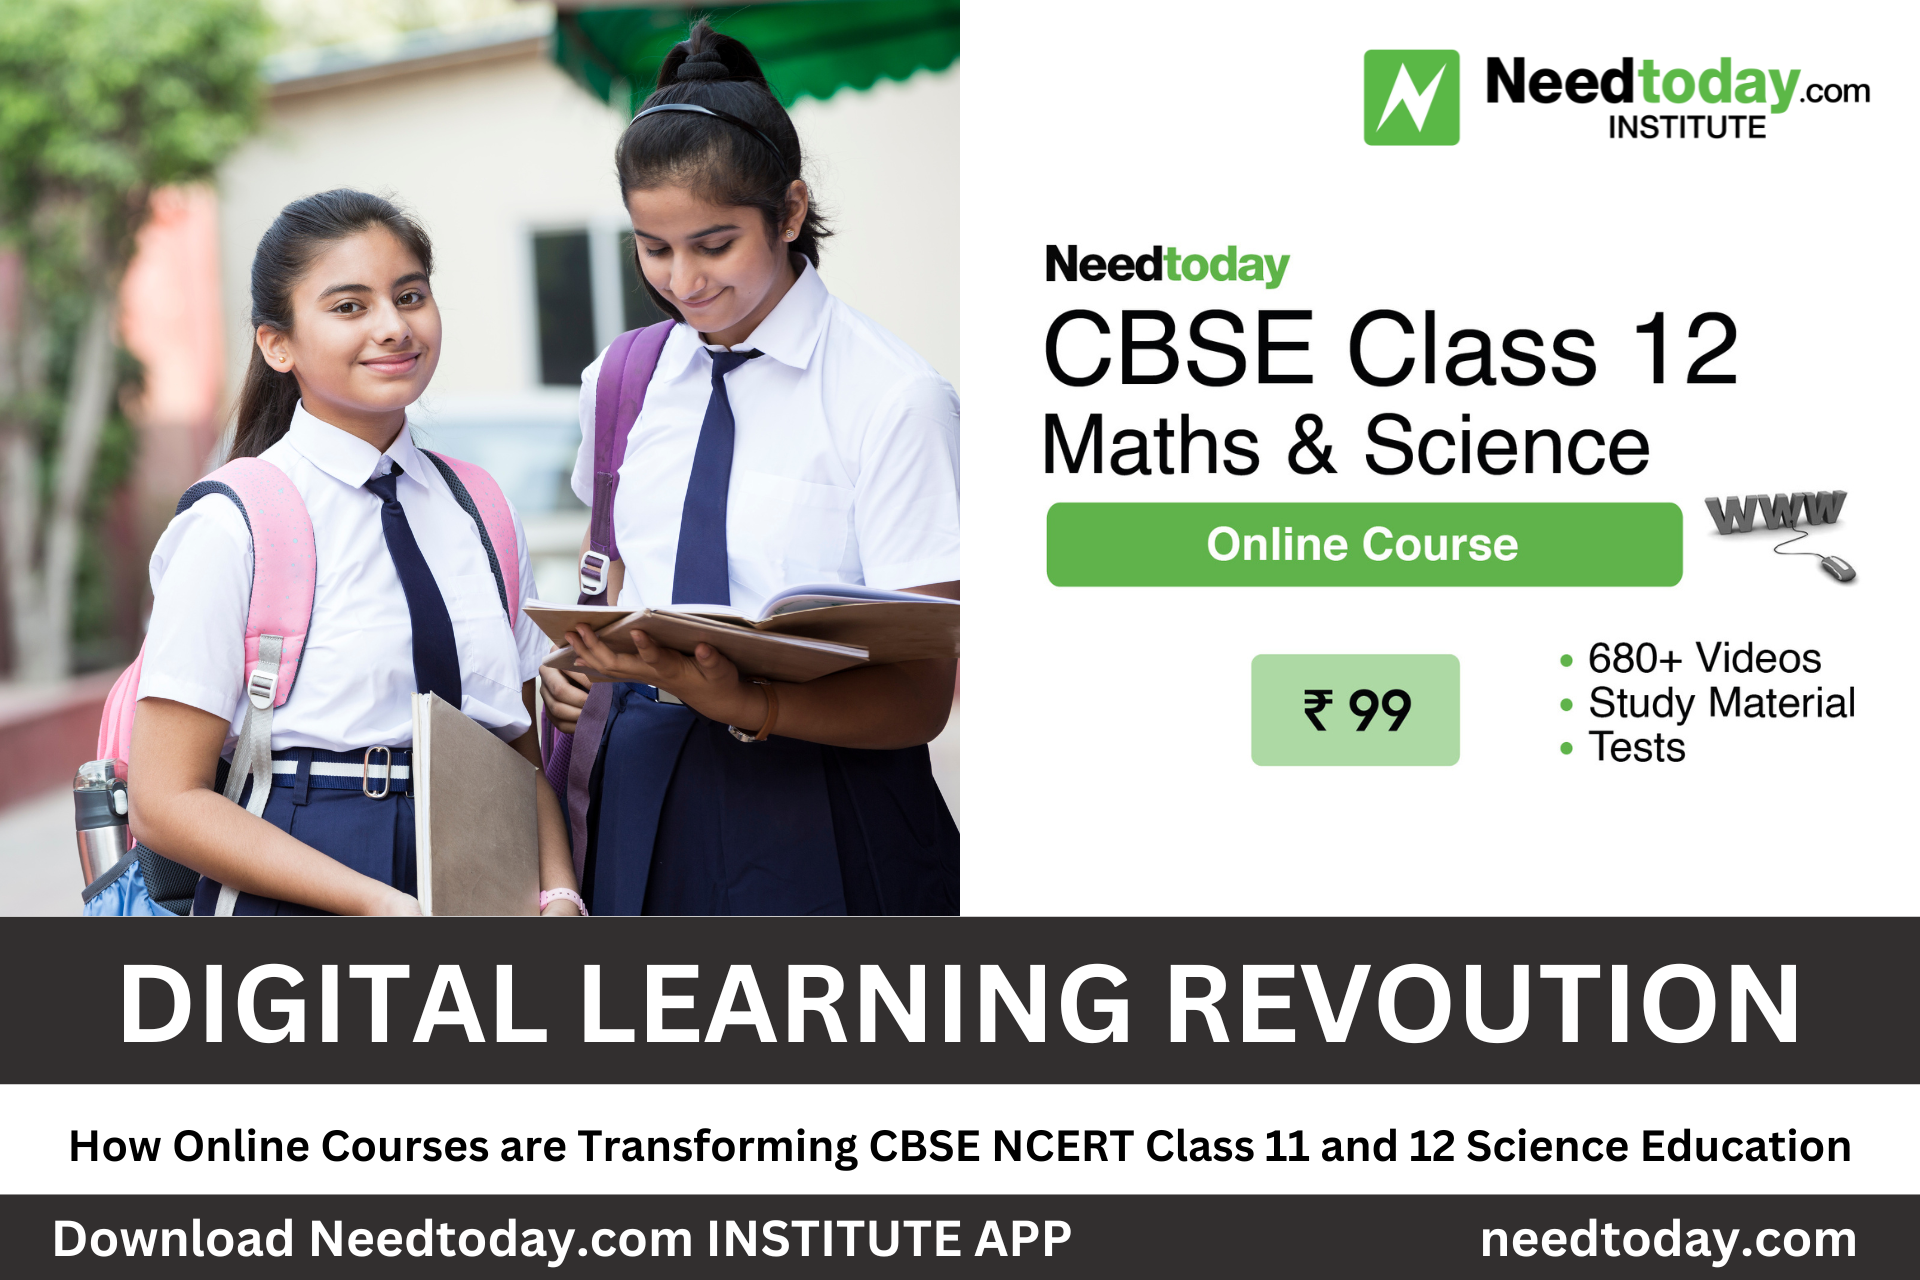 Digital Learning Revolution: How Online Courses are Transforming CBSE NCERT Class 11 and 12 Science Education